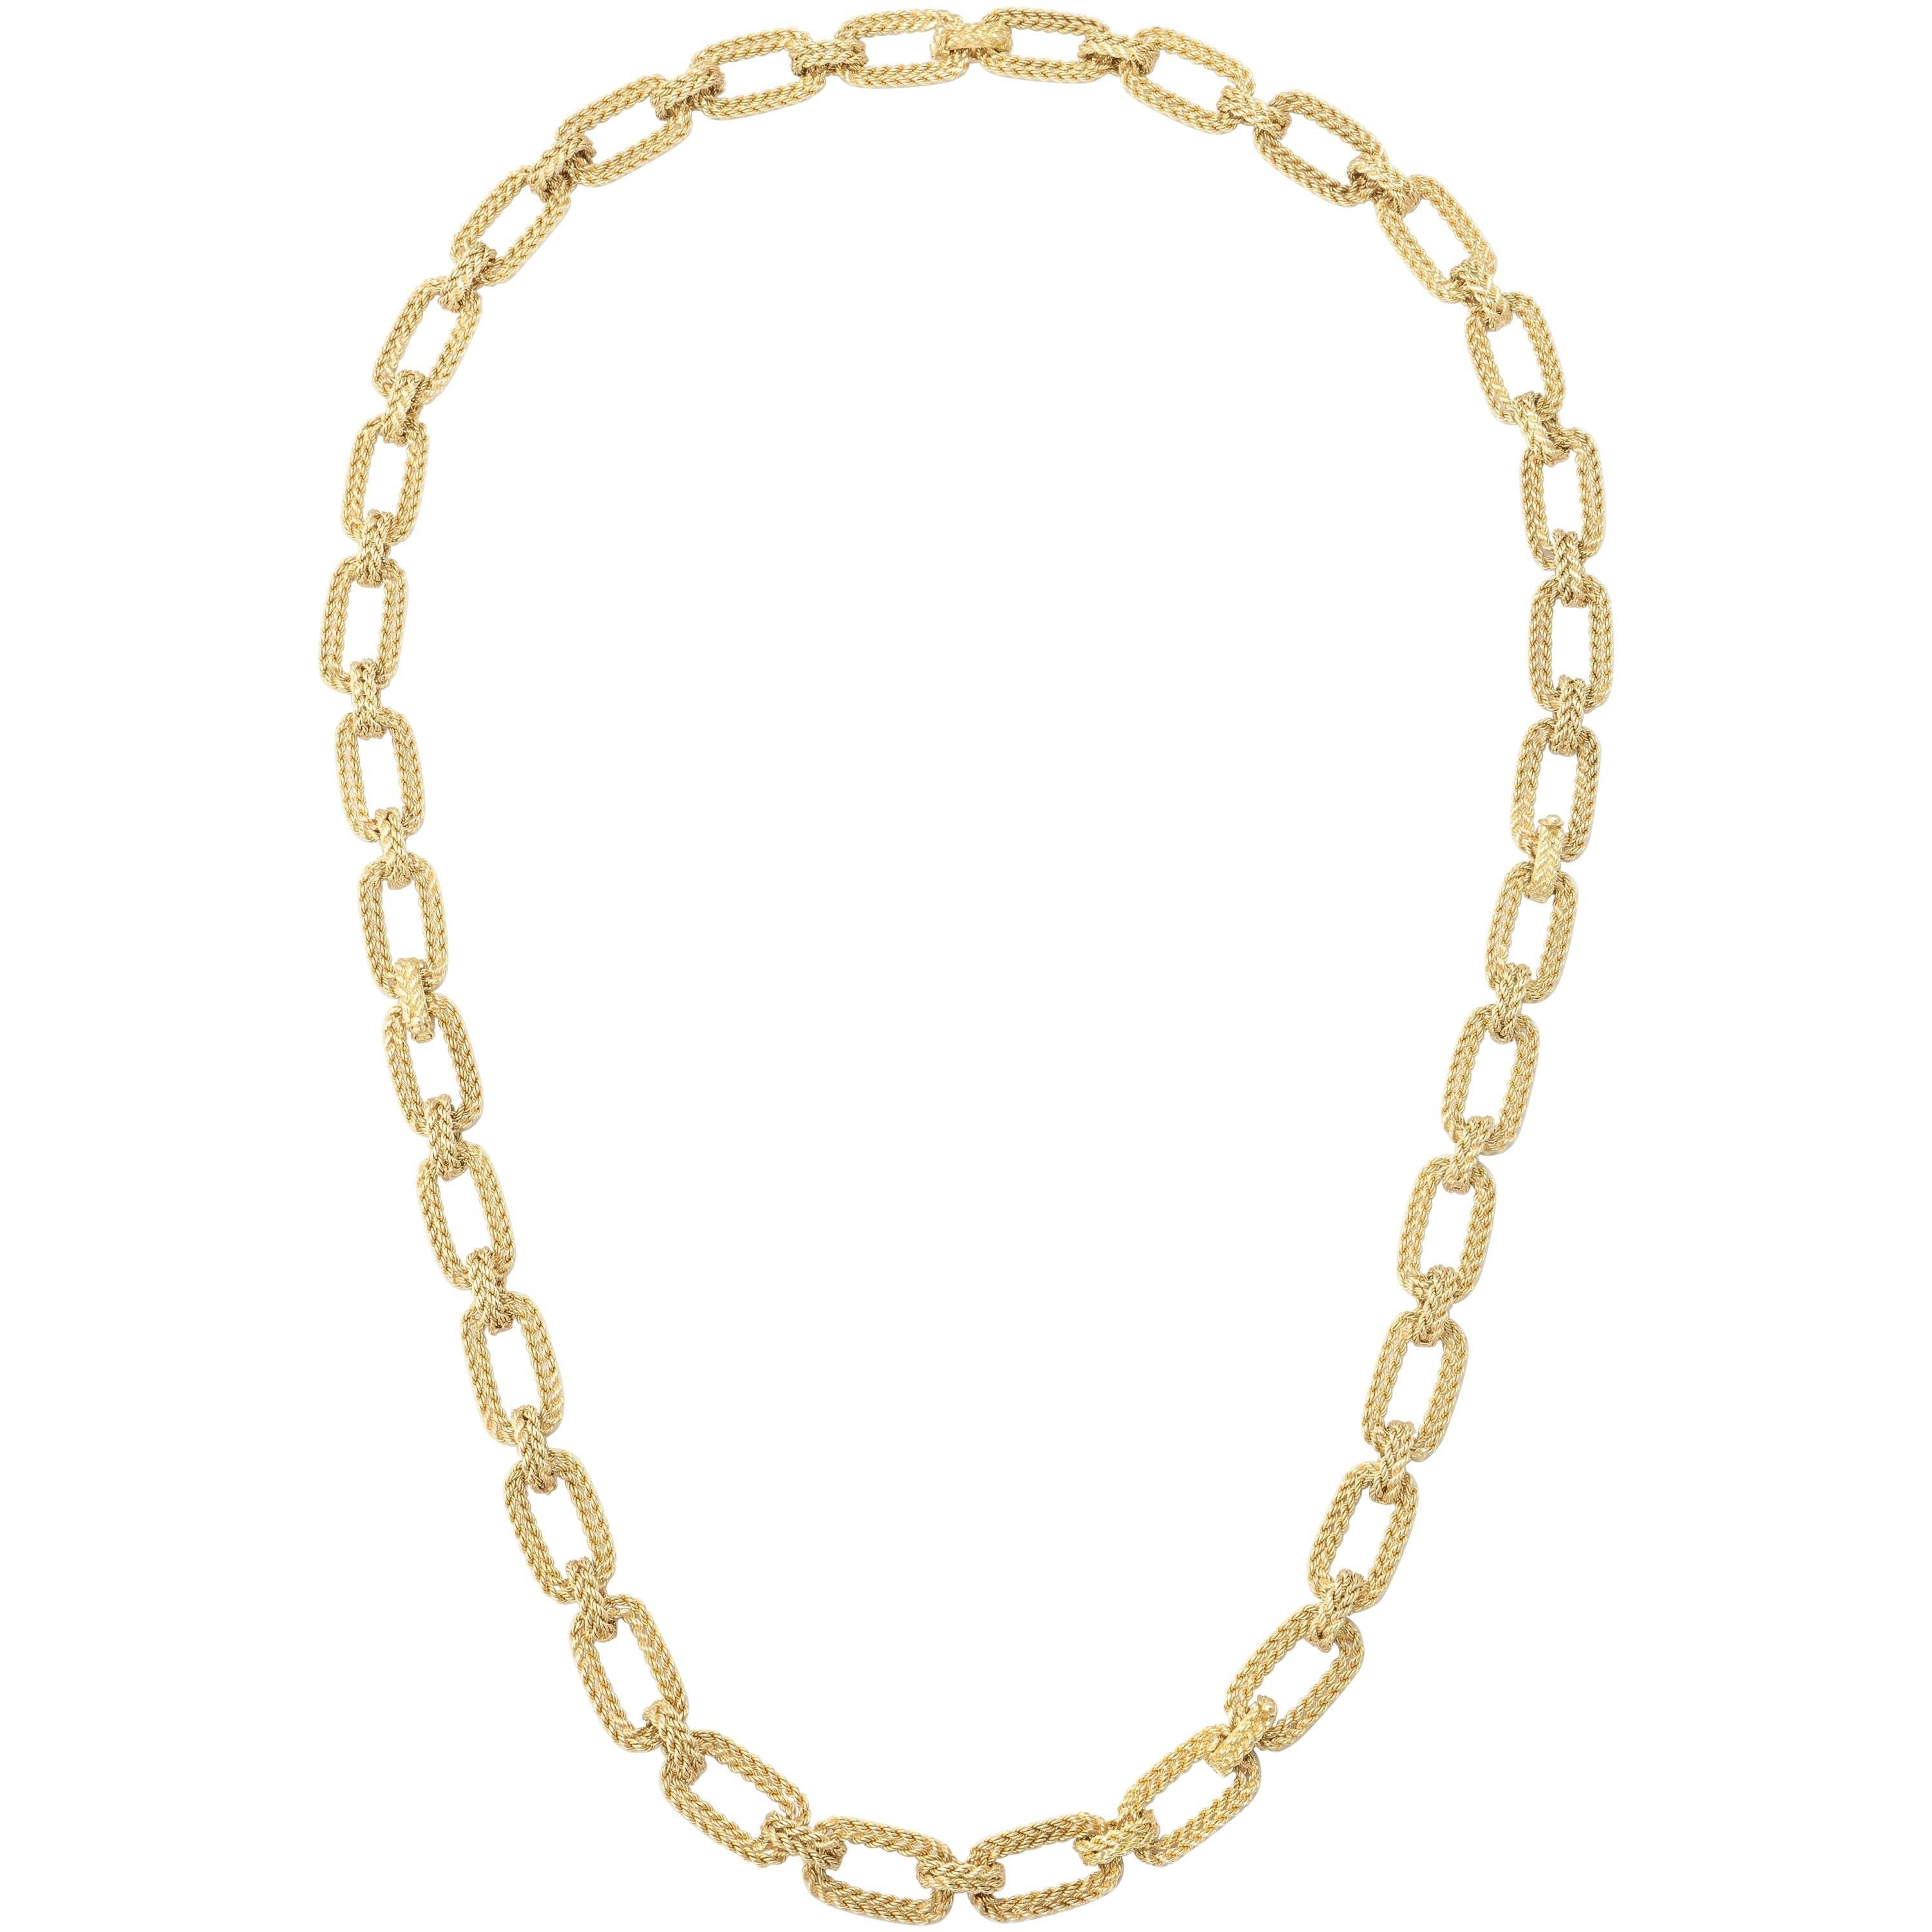 Gold Bar and Rope Chain Necklace of Variable Length